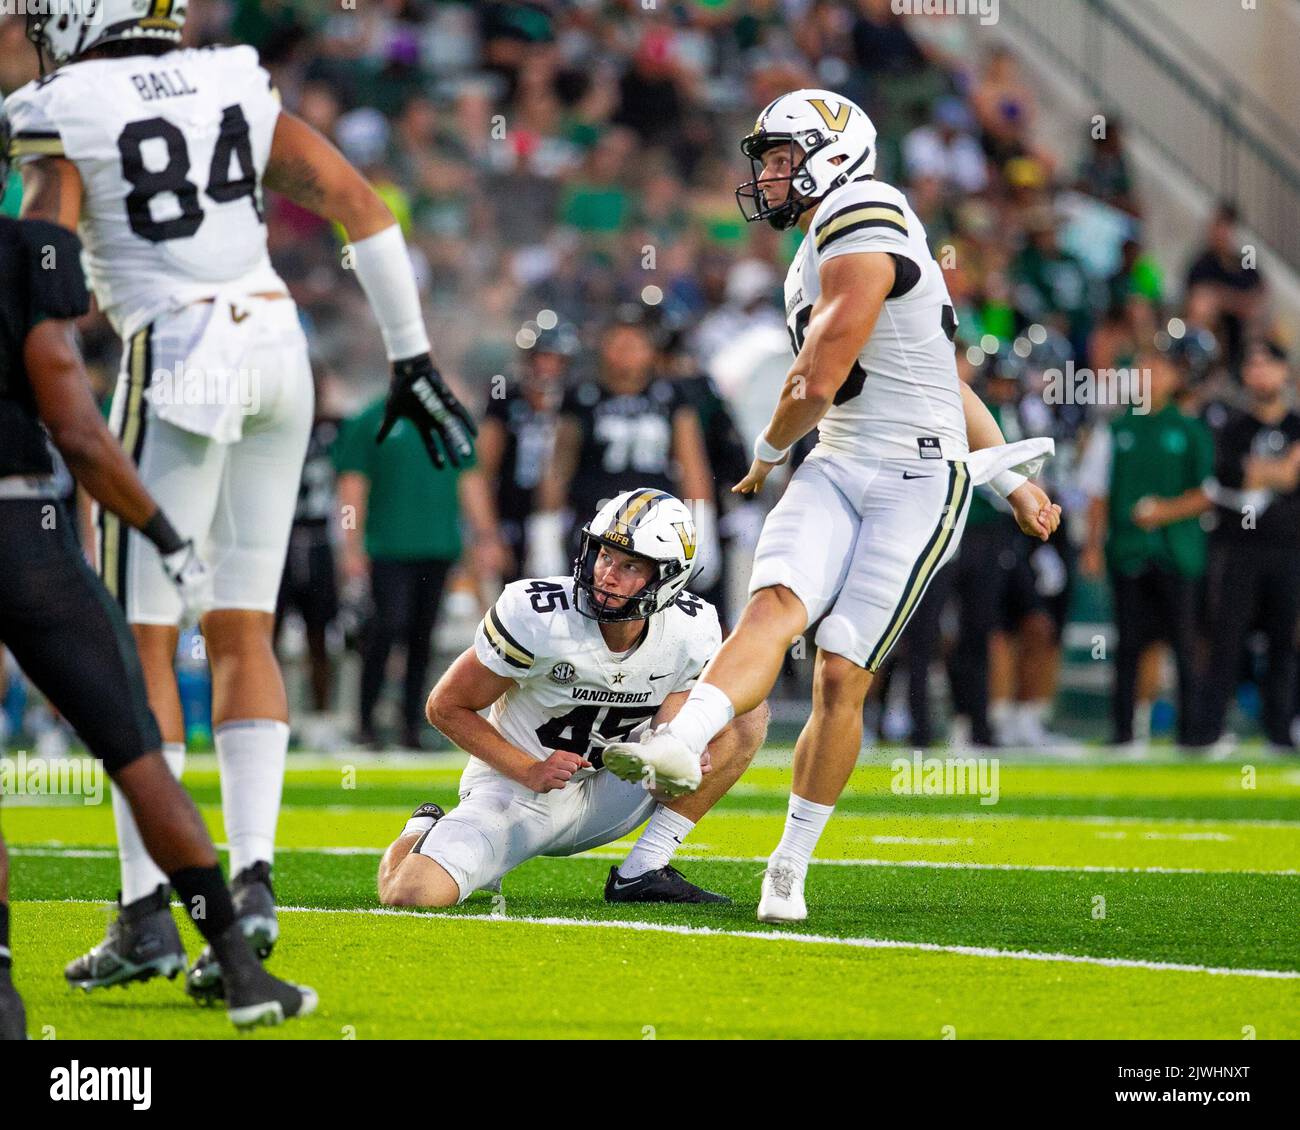 August 27, 2022 - Vanderbilt Commodores place kicker Joseph Bulovas (36) watches his extra point attempt during the third quarter of the Hawaii vs. Vanderbilt football game at the Clarence T. C. Ching Athletics Complex in Honolulu, Hawaii. Glenn Yoza/CSM Stock Photo